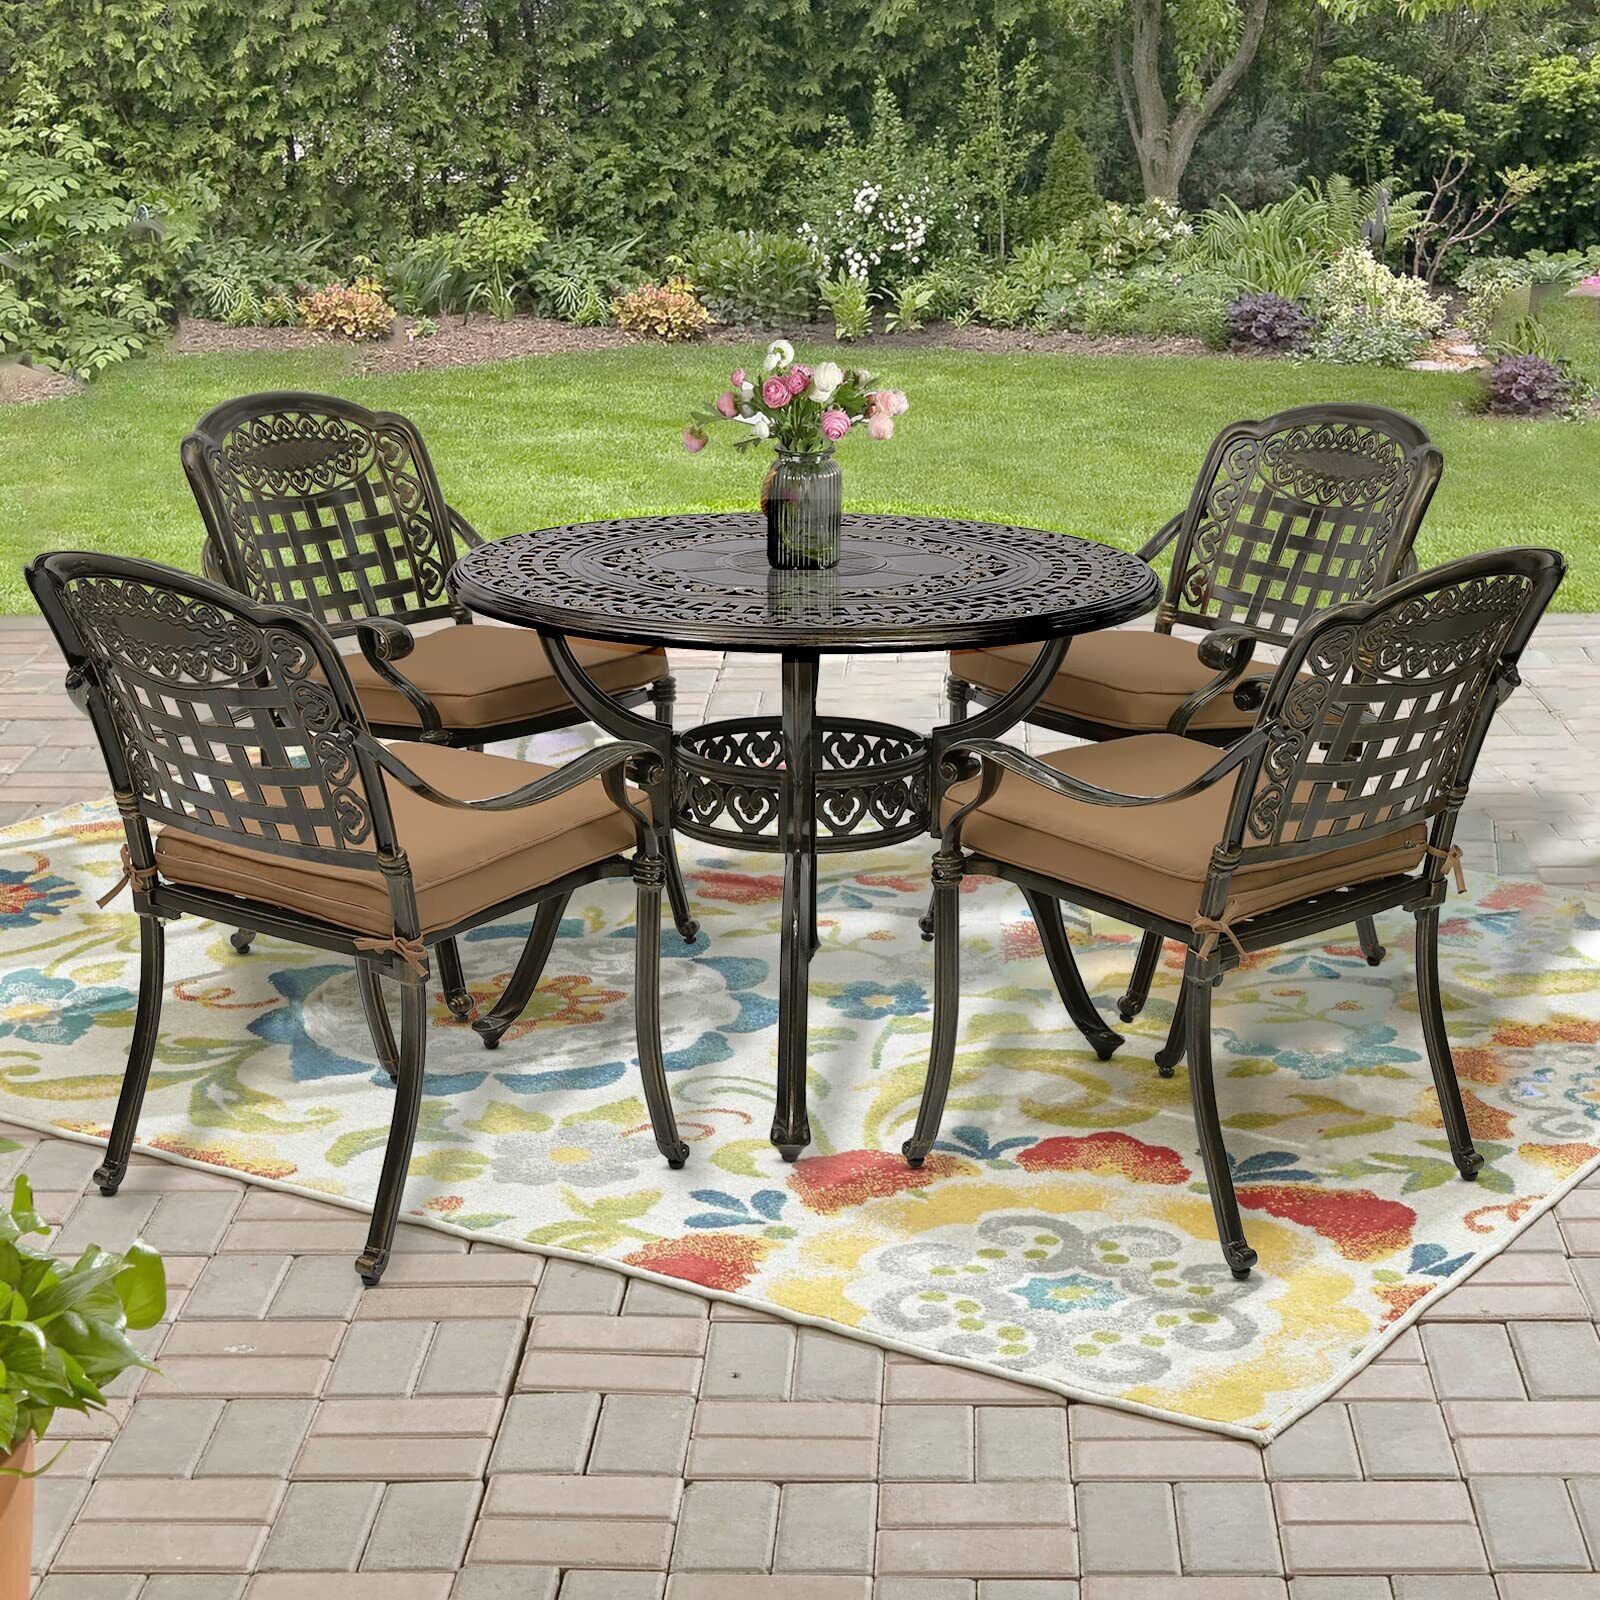 5 Piece Outdoor Patio Dining Set Cast Aluminum Includes 4 Chairs, 1 Round  Table | Ebay Inside 5 Piece Outdoor Patio Furniture Set (Photo 8 of 15)